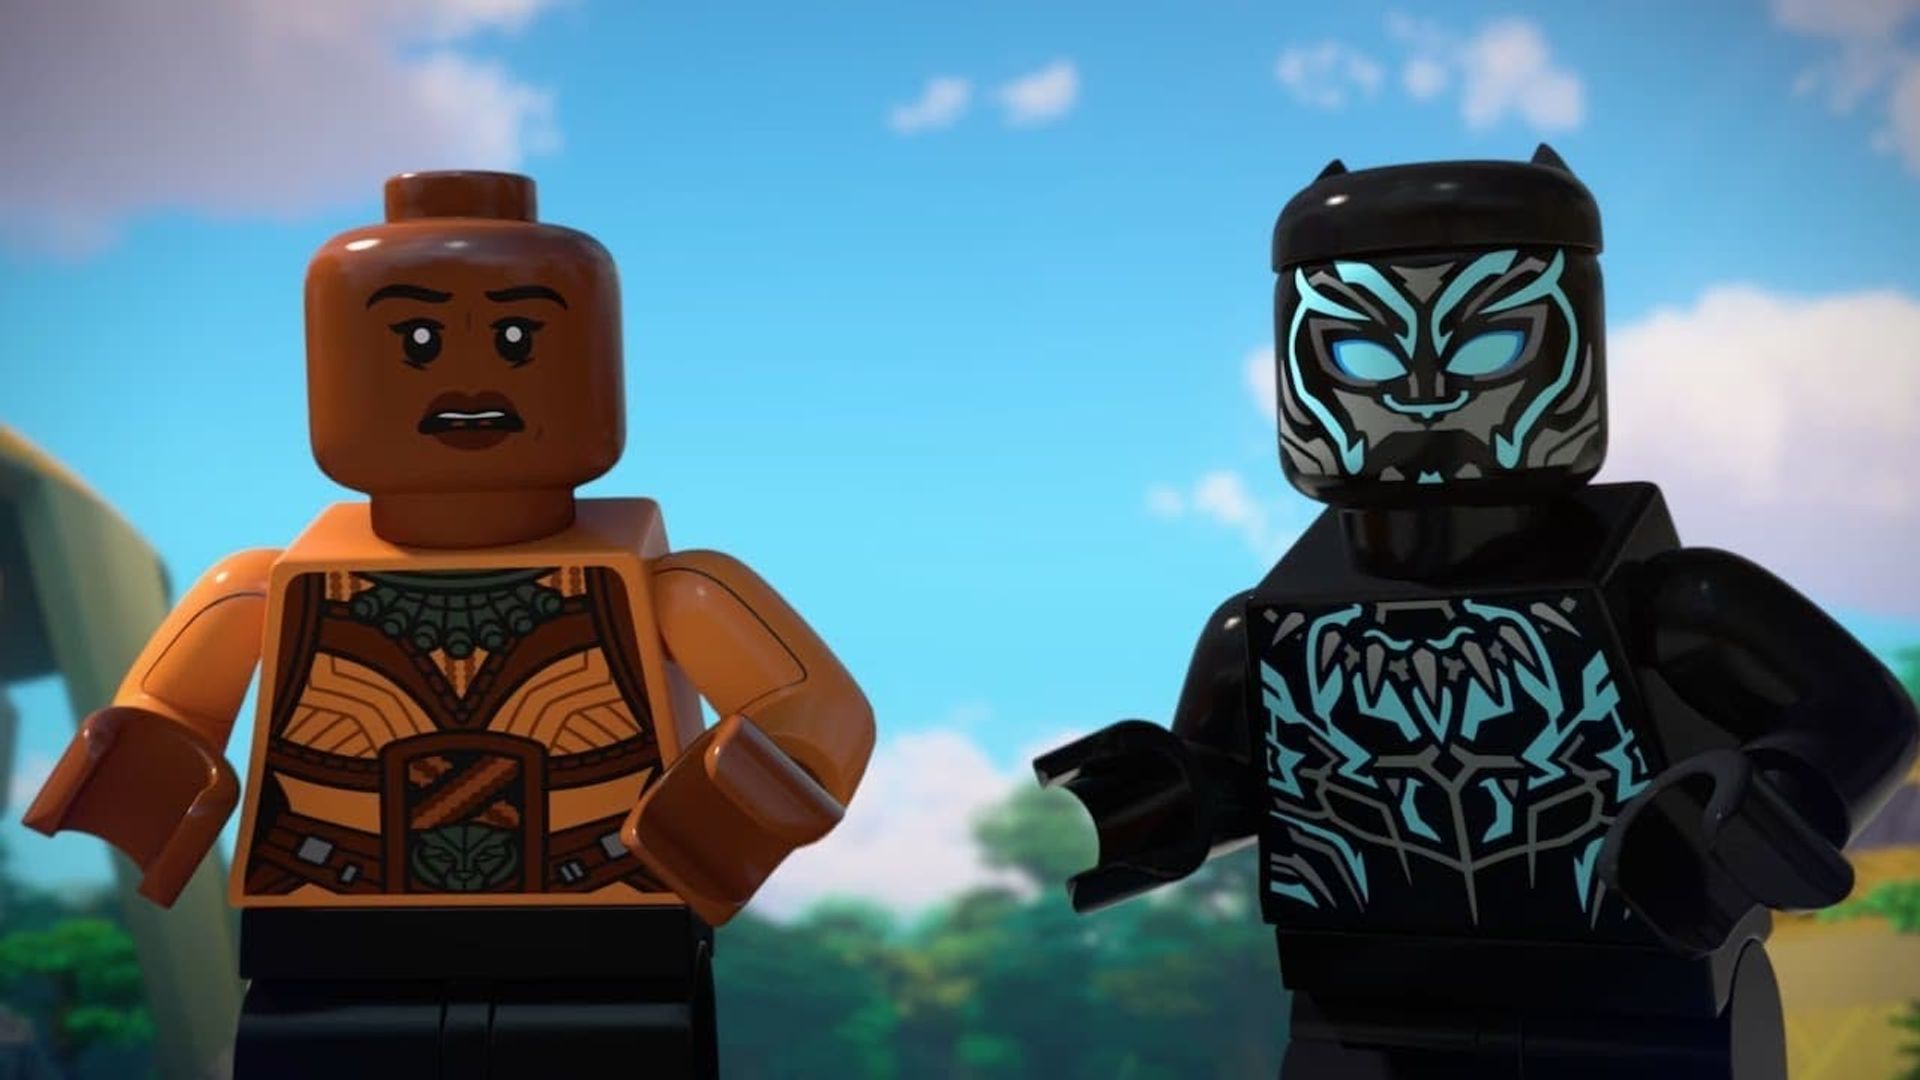 LEGO Marvel Super Heroes: Black Panther - Trouble in Wakanda background